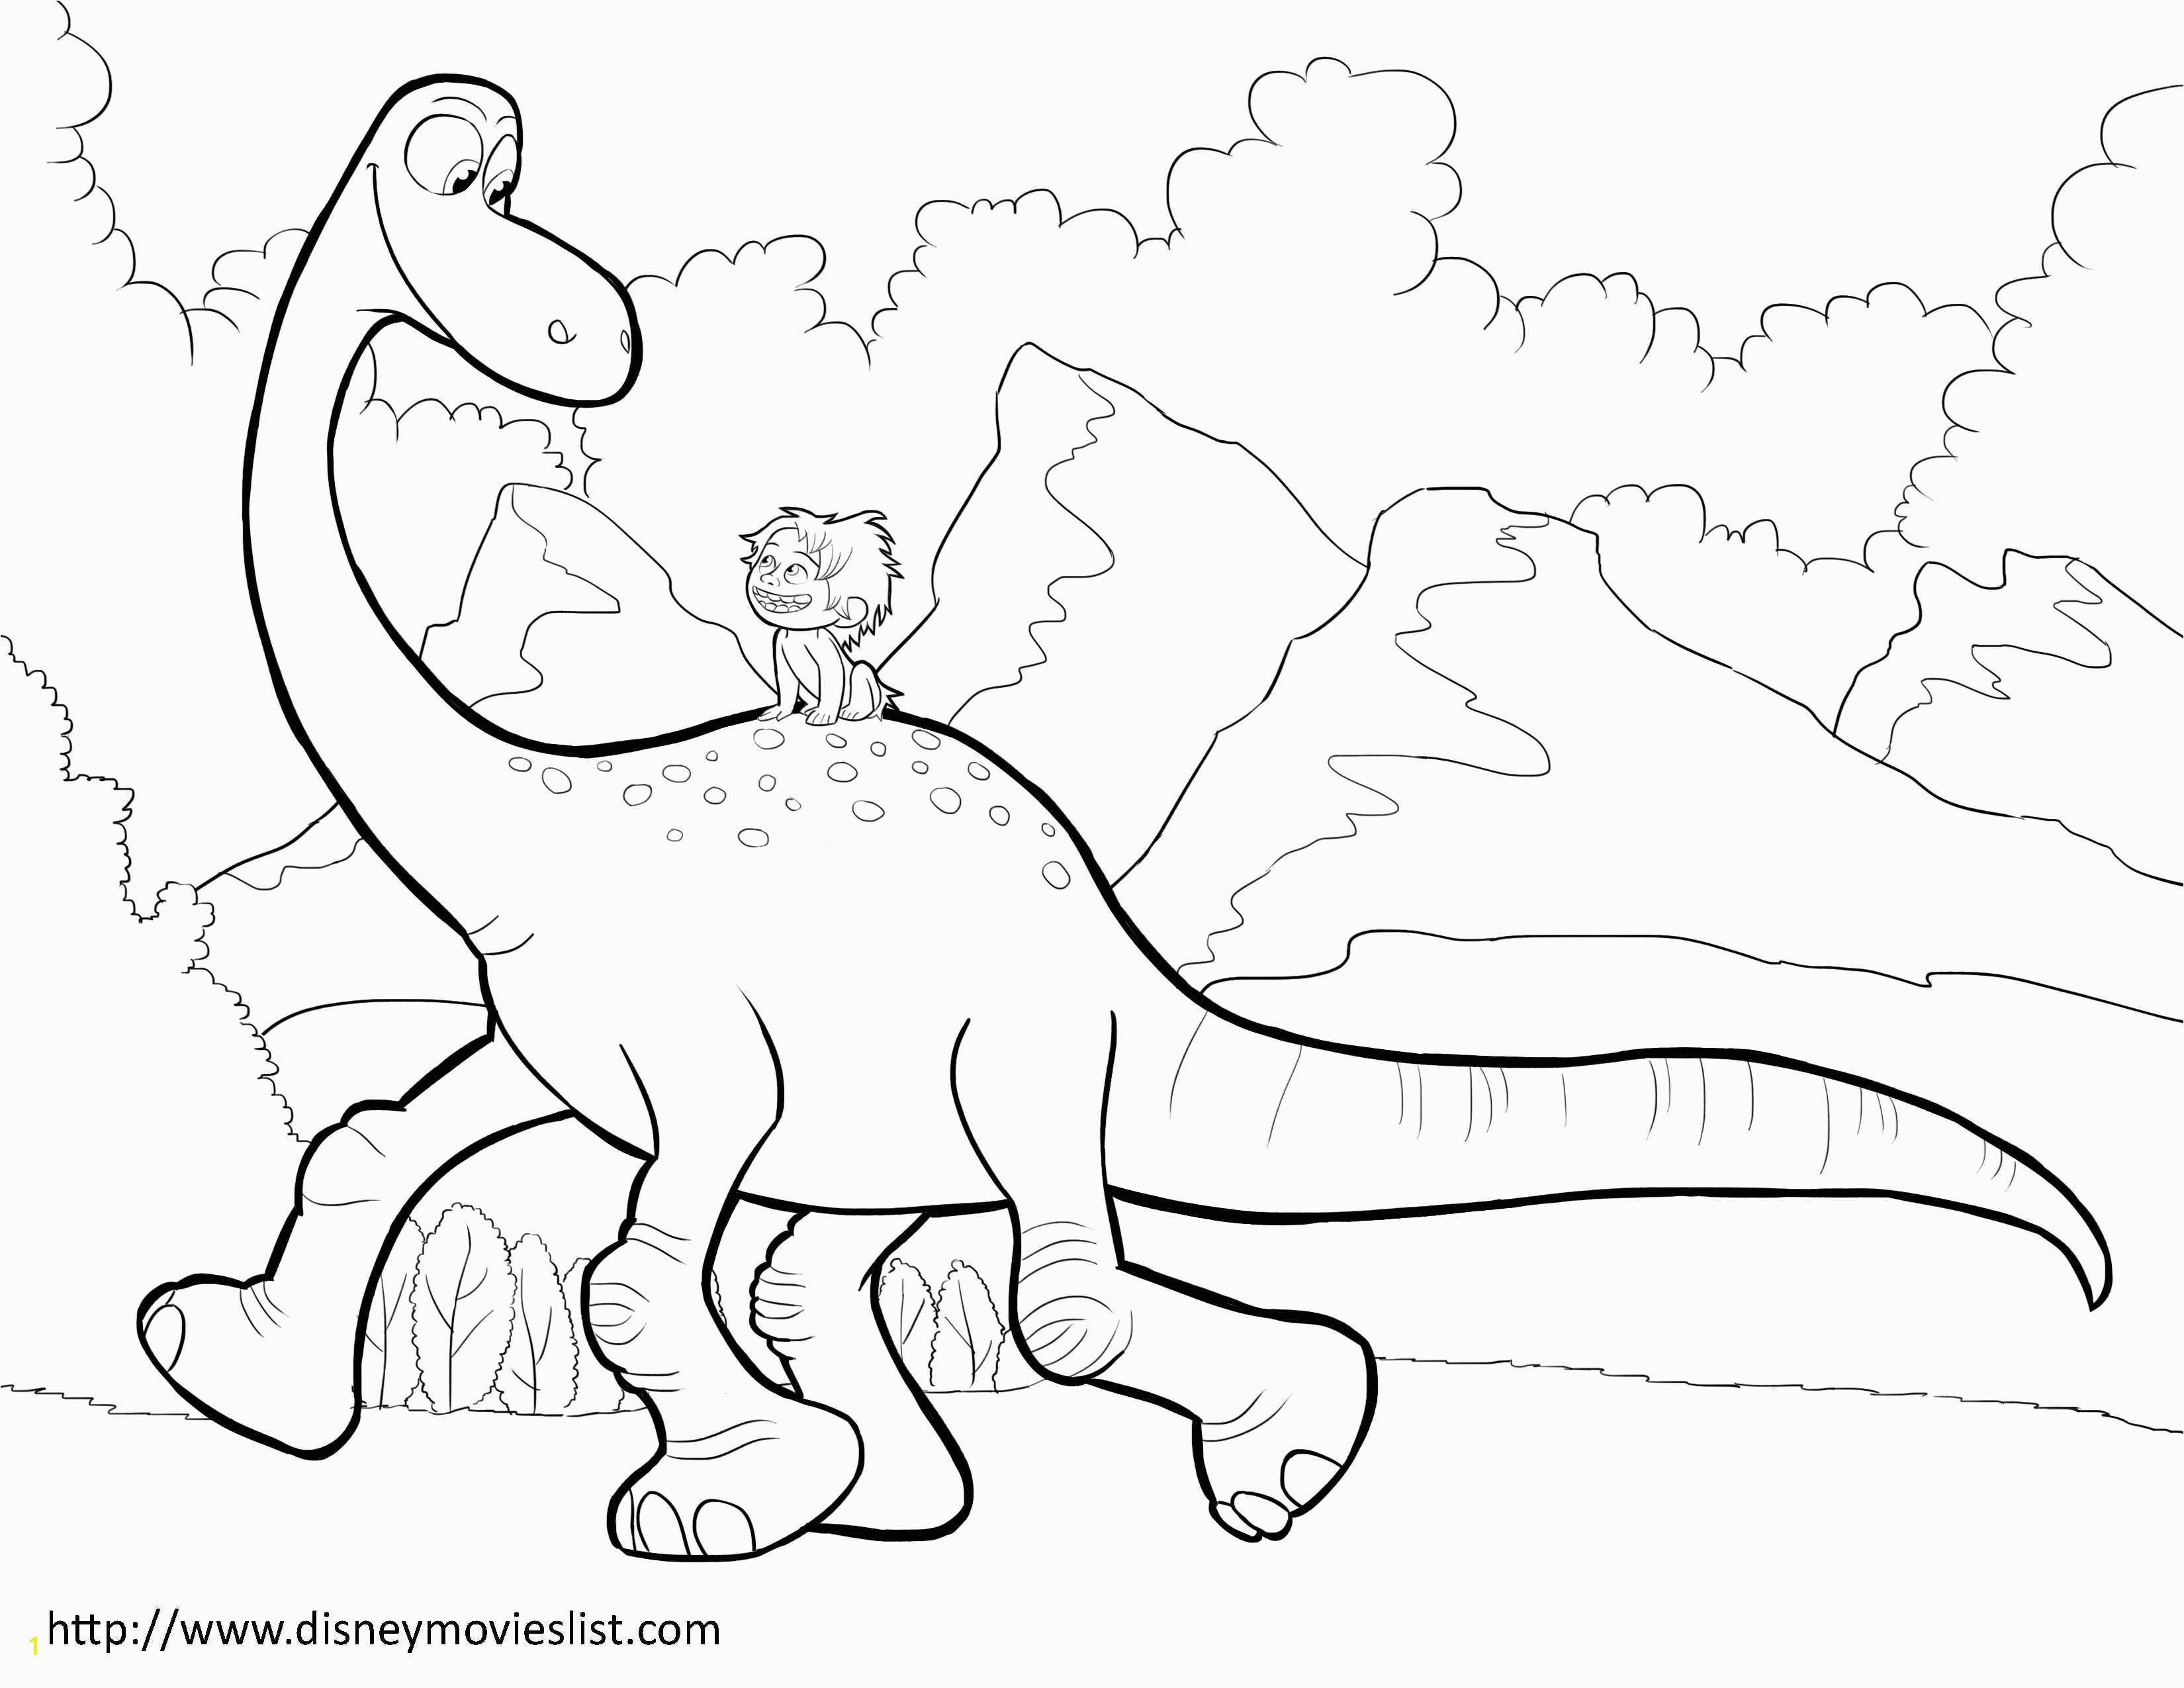 Best Free Dinosaur Coloring Pages Pdf Book Booksosaurs Cute Page For